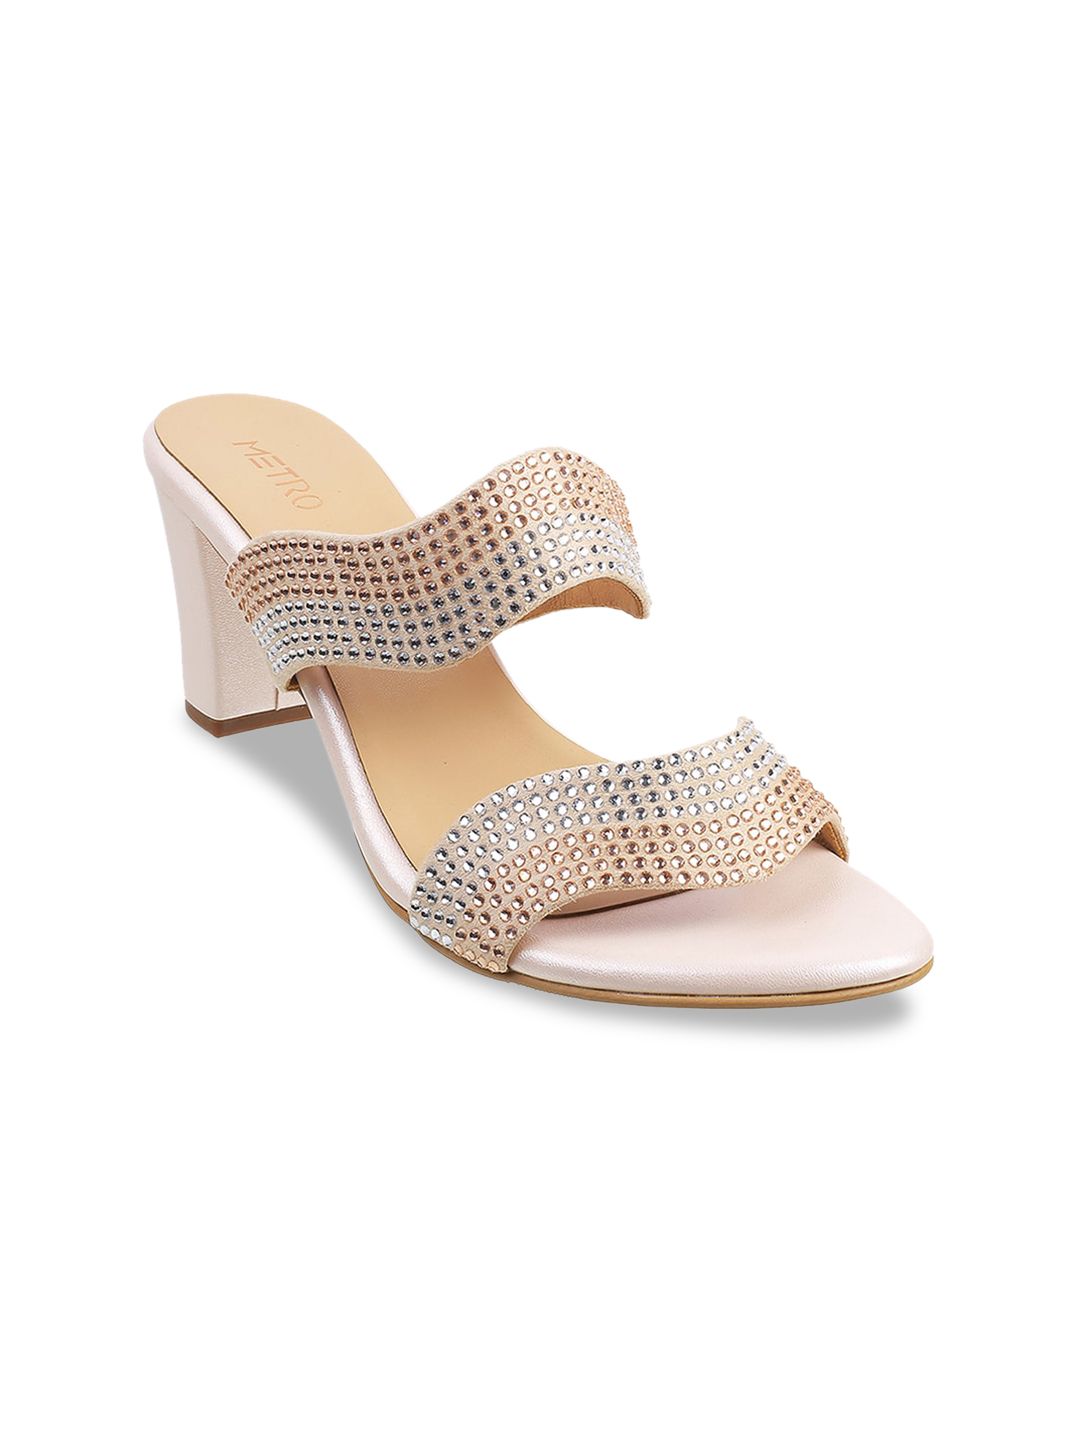 Metro Gold-Toned Embellished Block Sandals Price in India